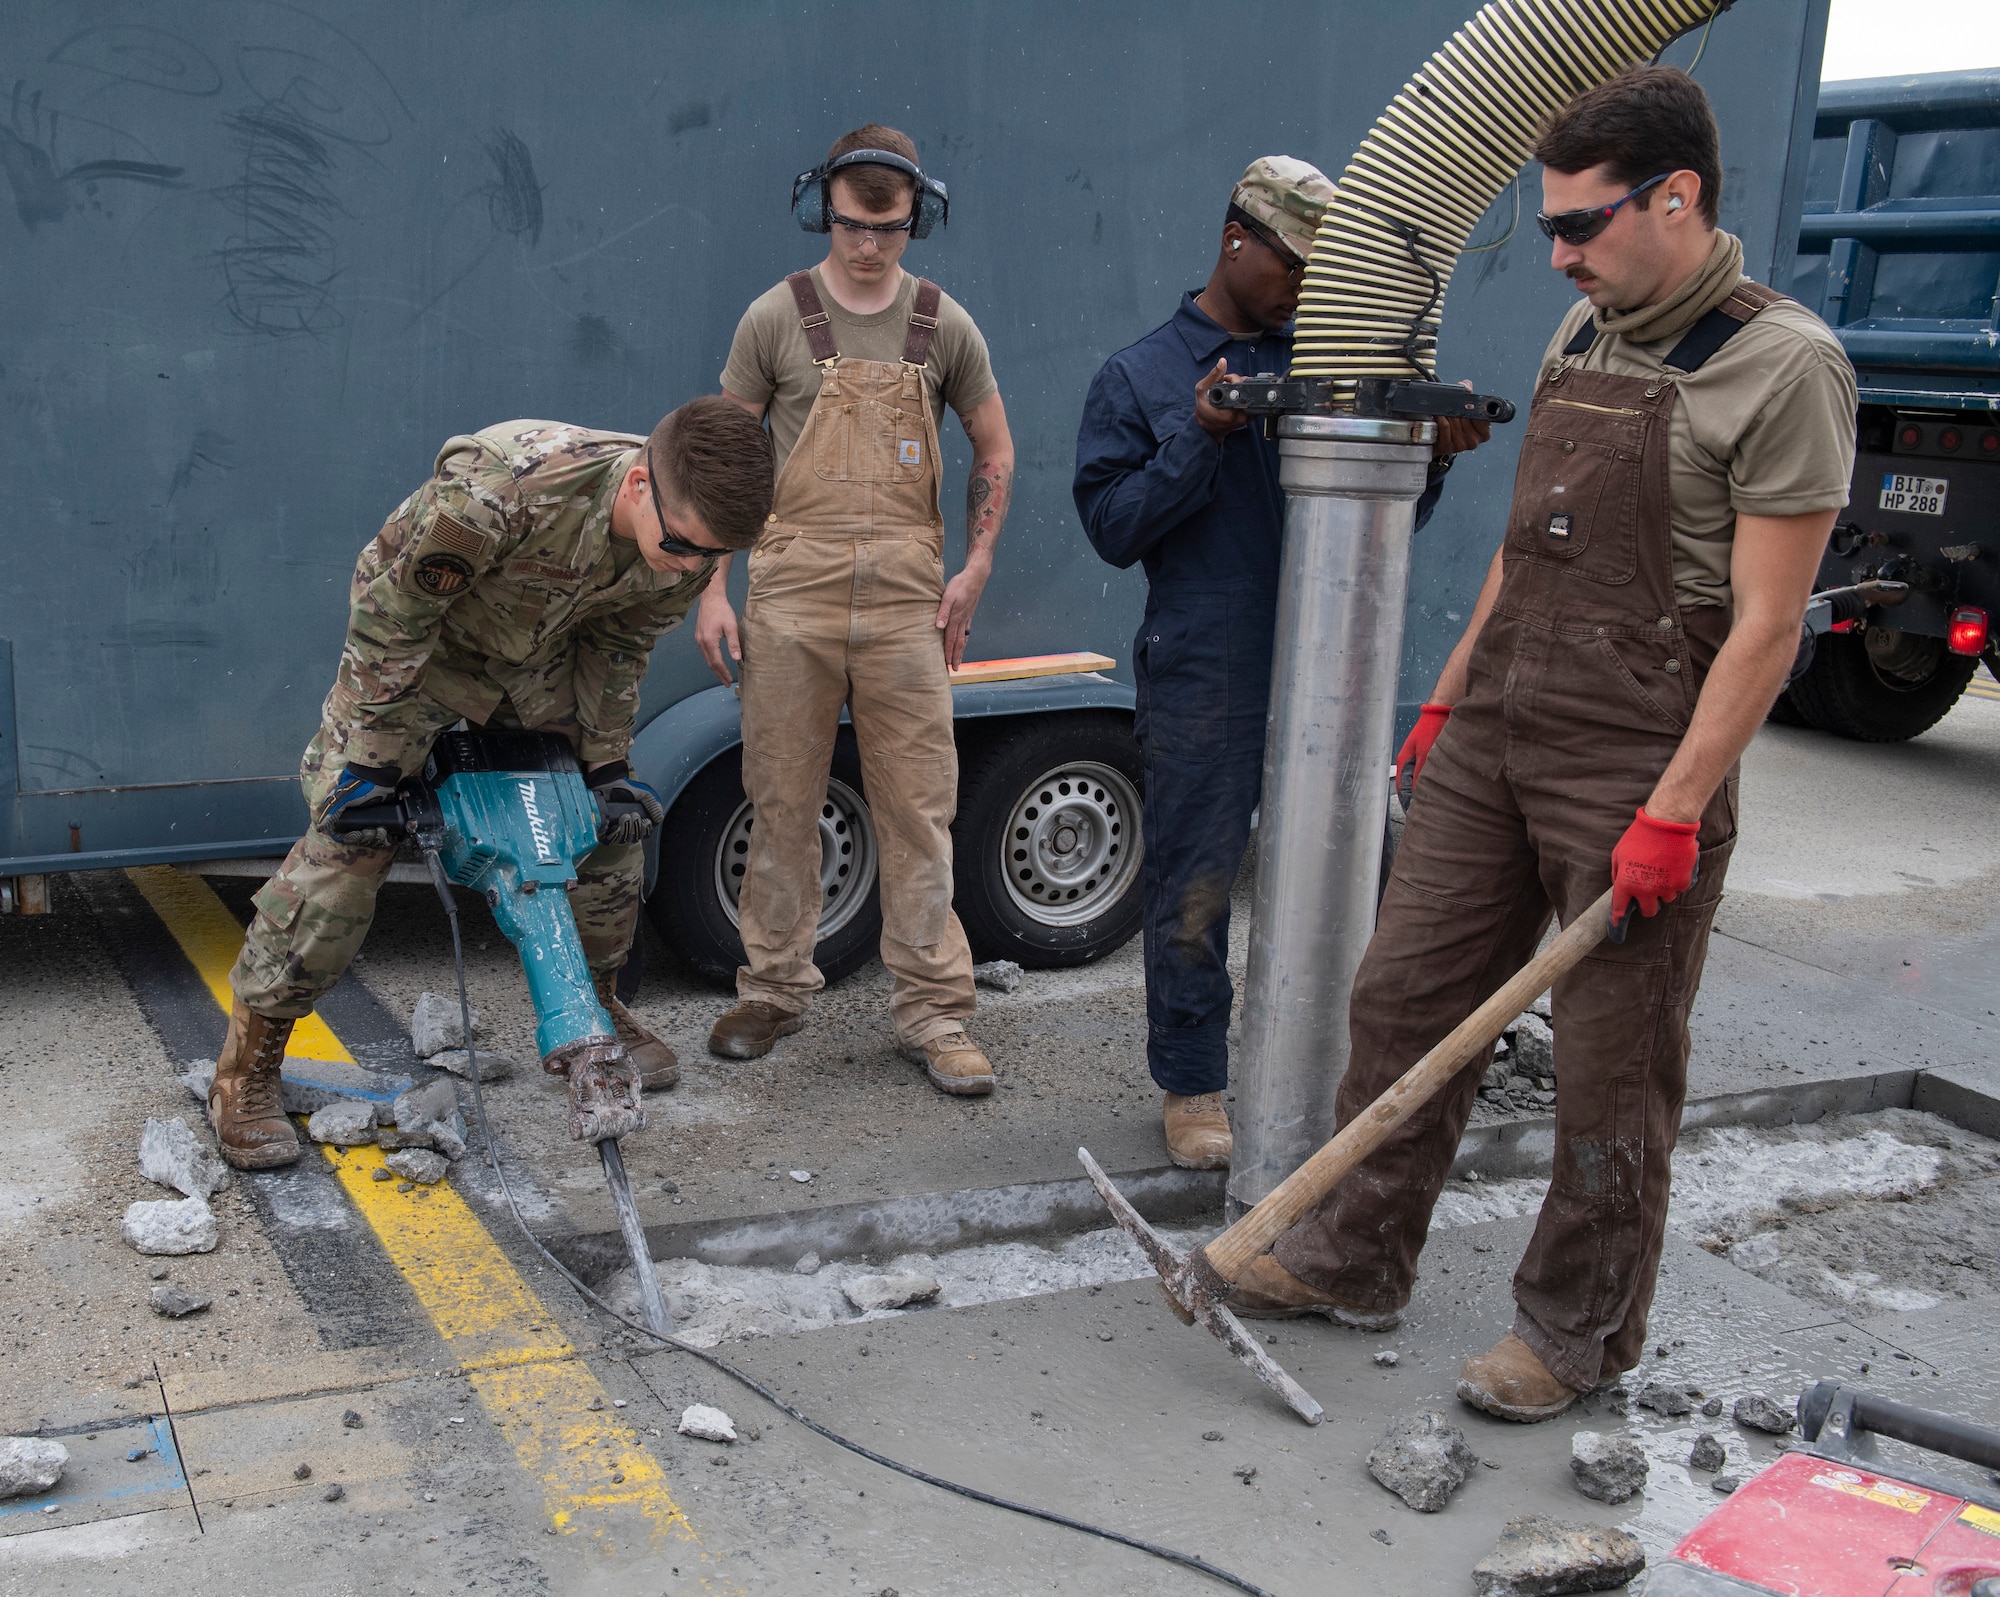 U.S. Air Force Airmen from the 52nd Civil Engineer Squadron pavements and construction equipment shop use a jackhammer on concrete at Spangdahlem Air Base, Germany, Sept. 10, 2020. The Airmen, known as the Dirt Boyz, consistently perform repairs to the flightline to ensure the 52 FW mission can be accomplished. (U.S. Air Force photo by Airman 1st Class Alison Stewart)